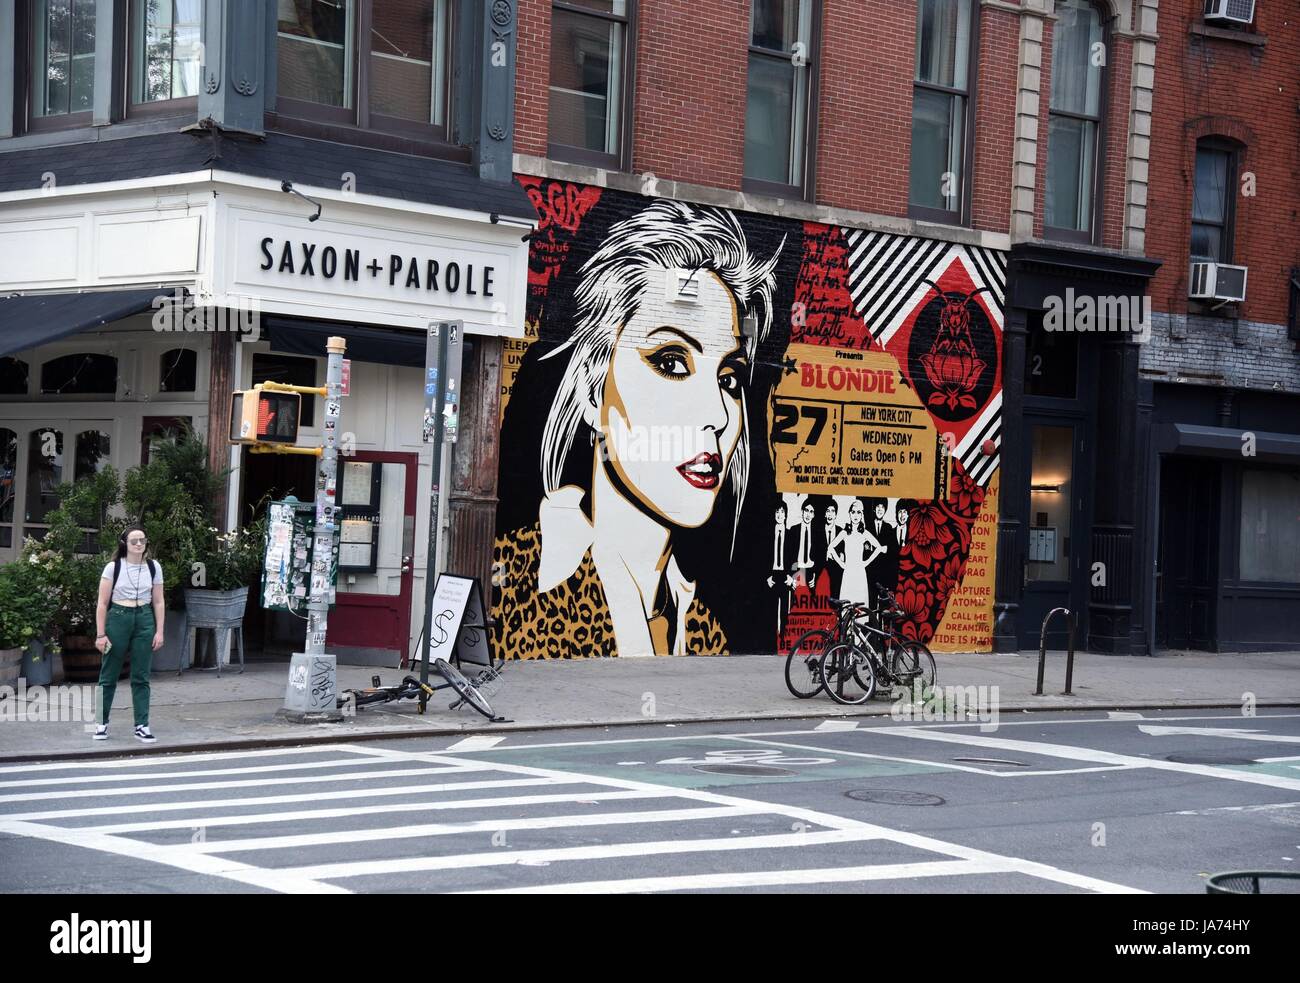 New York, USA. 24th Aug, 2017. Street Art out and about for Shepard Fairey Unveiled New Mural of Blondie's Debbie Harry, across from the old CBGB's at Bowery and Bleecker, New York, NY August 24, 2017. Credit: Everett Collection Inc/Alamy Live News Stock Photo